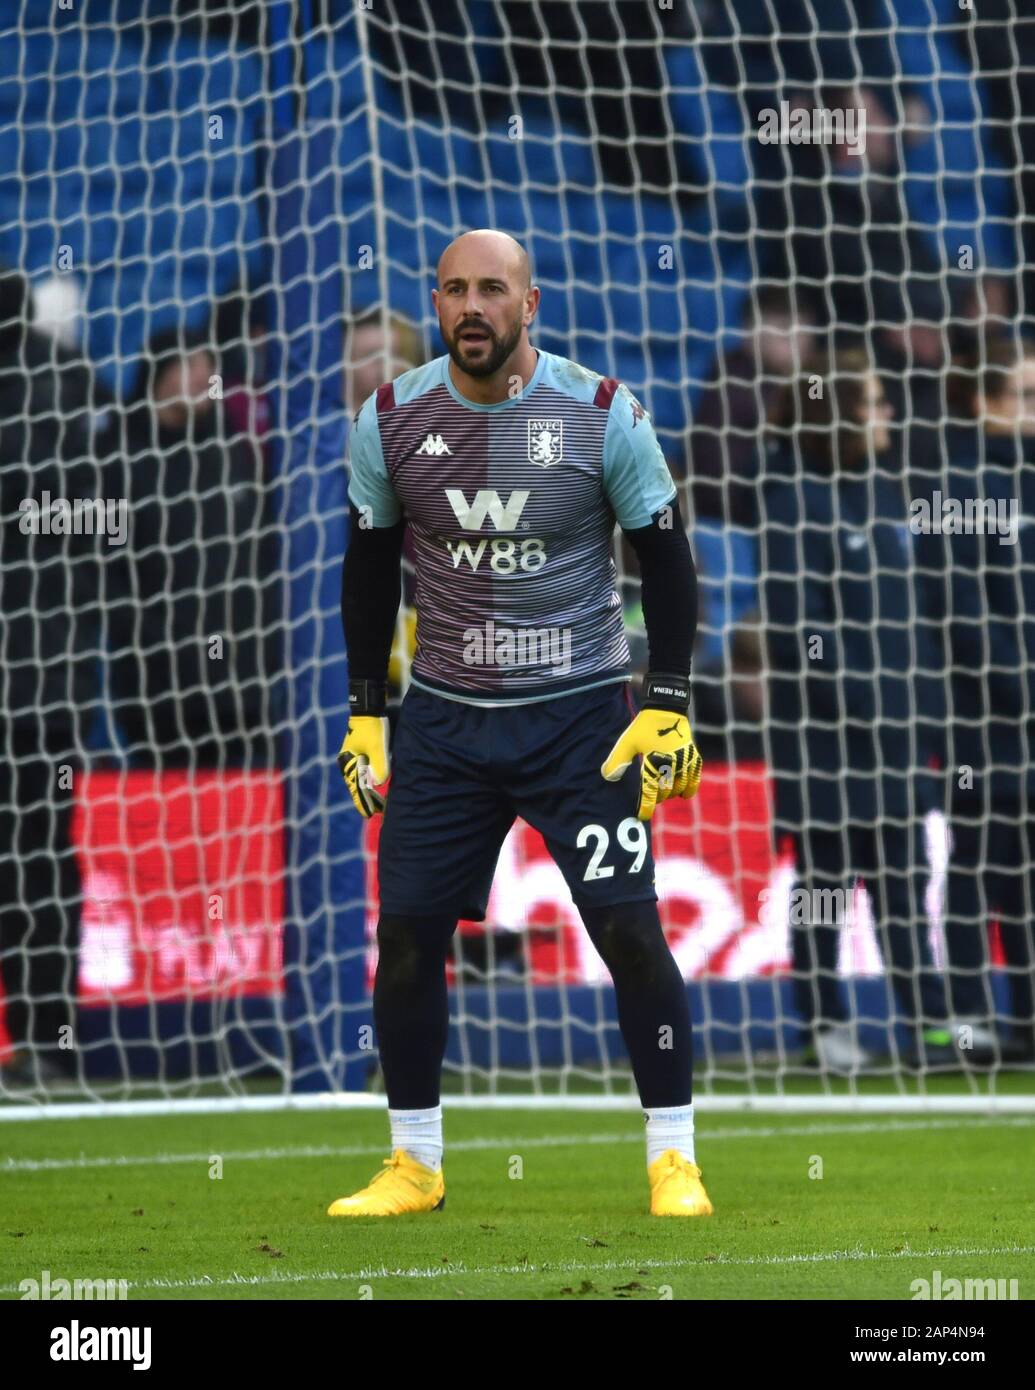 Pepe Reina of Aston Villa warms up before the Premier League match between Brighton and Hove Albion and Aston Villa at The Amex Stadium Brighton, UK - 18th January 2020 - Editorial use only. No merchandising. For Football images FA and Premier League restrictions apply inc. no internet/mobile usage without FAPL license - for details contact Football Dataco Stock Photo